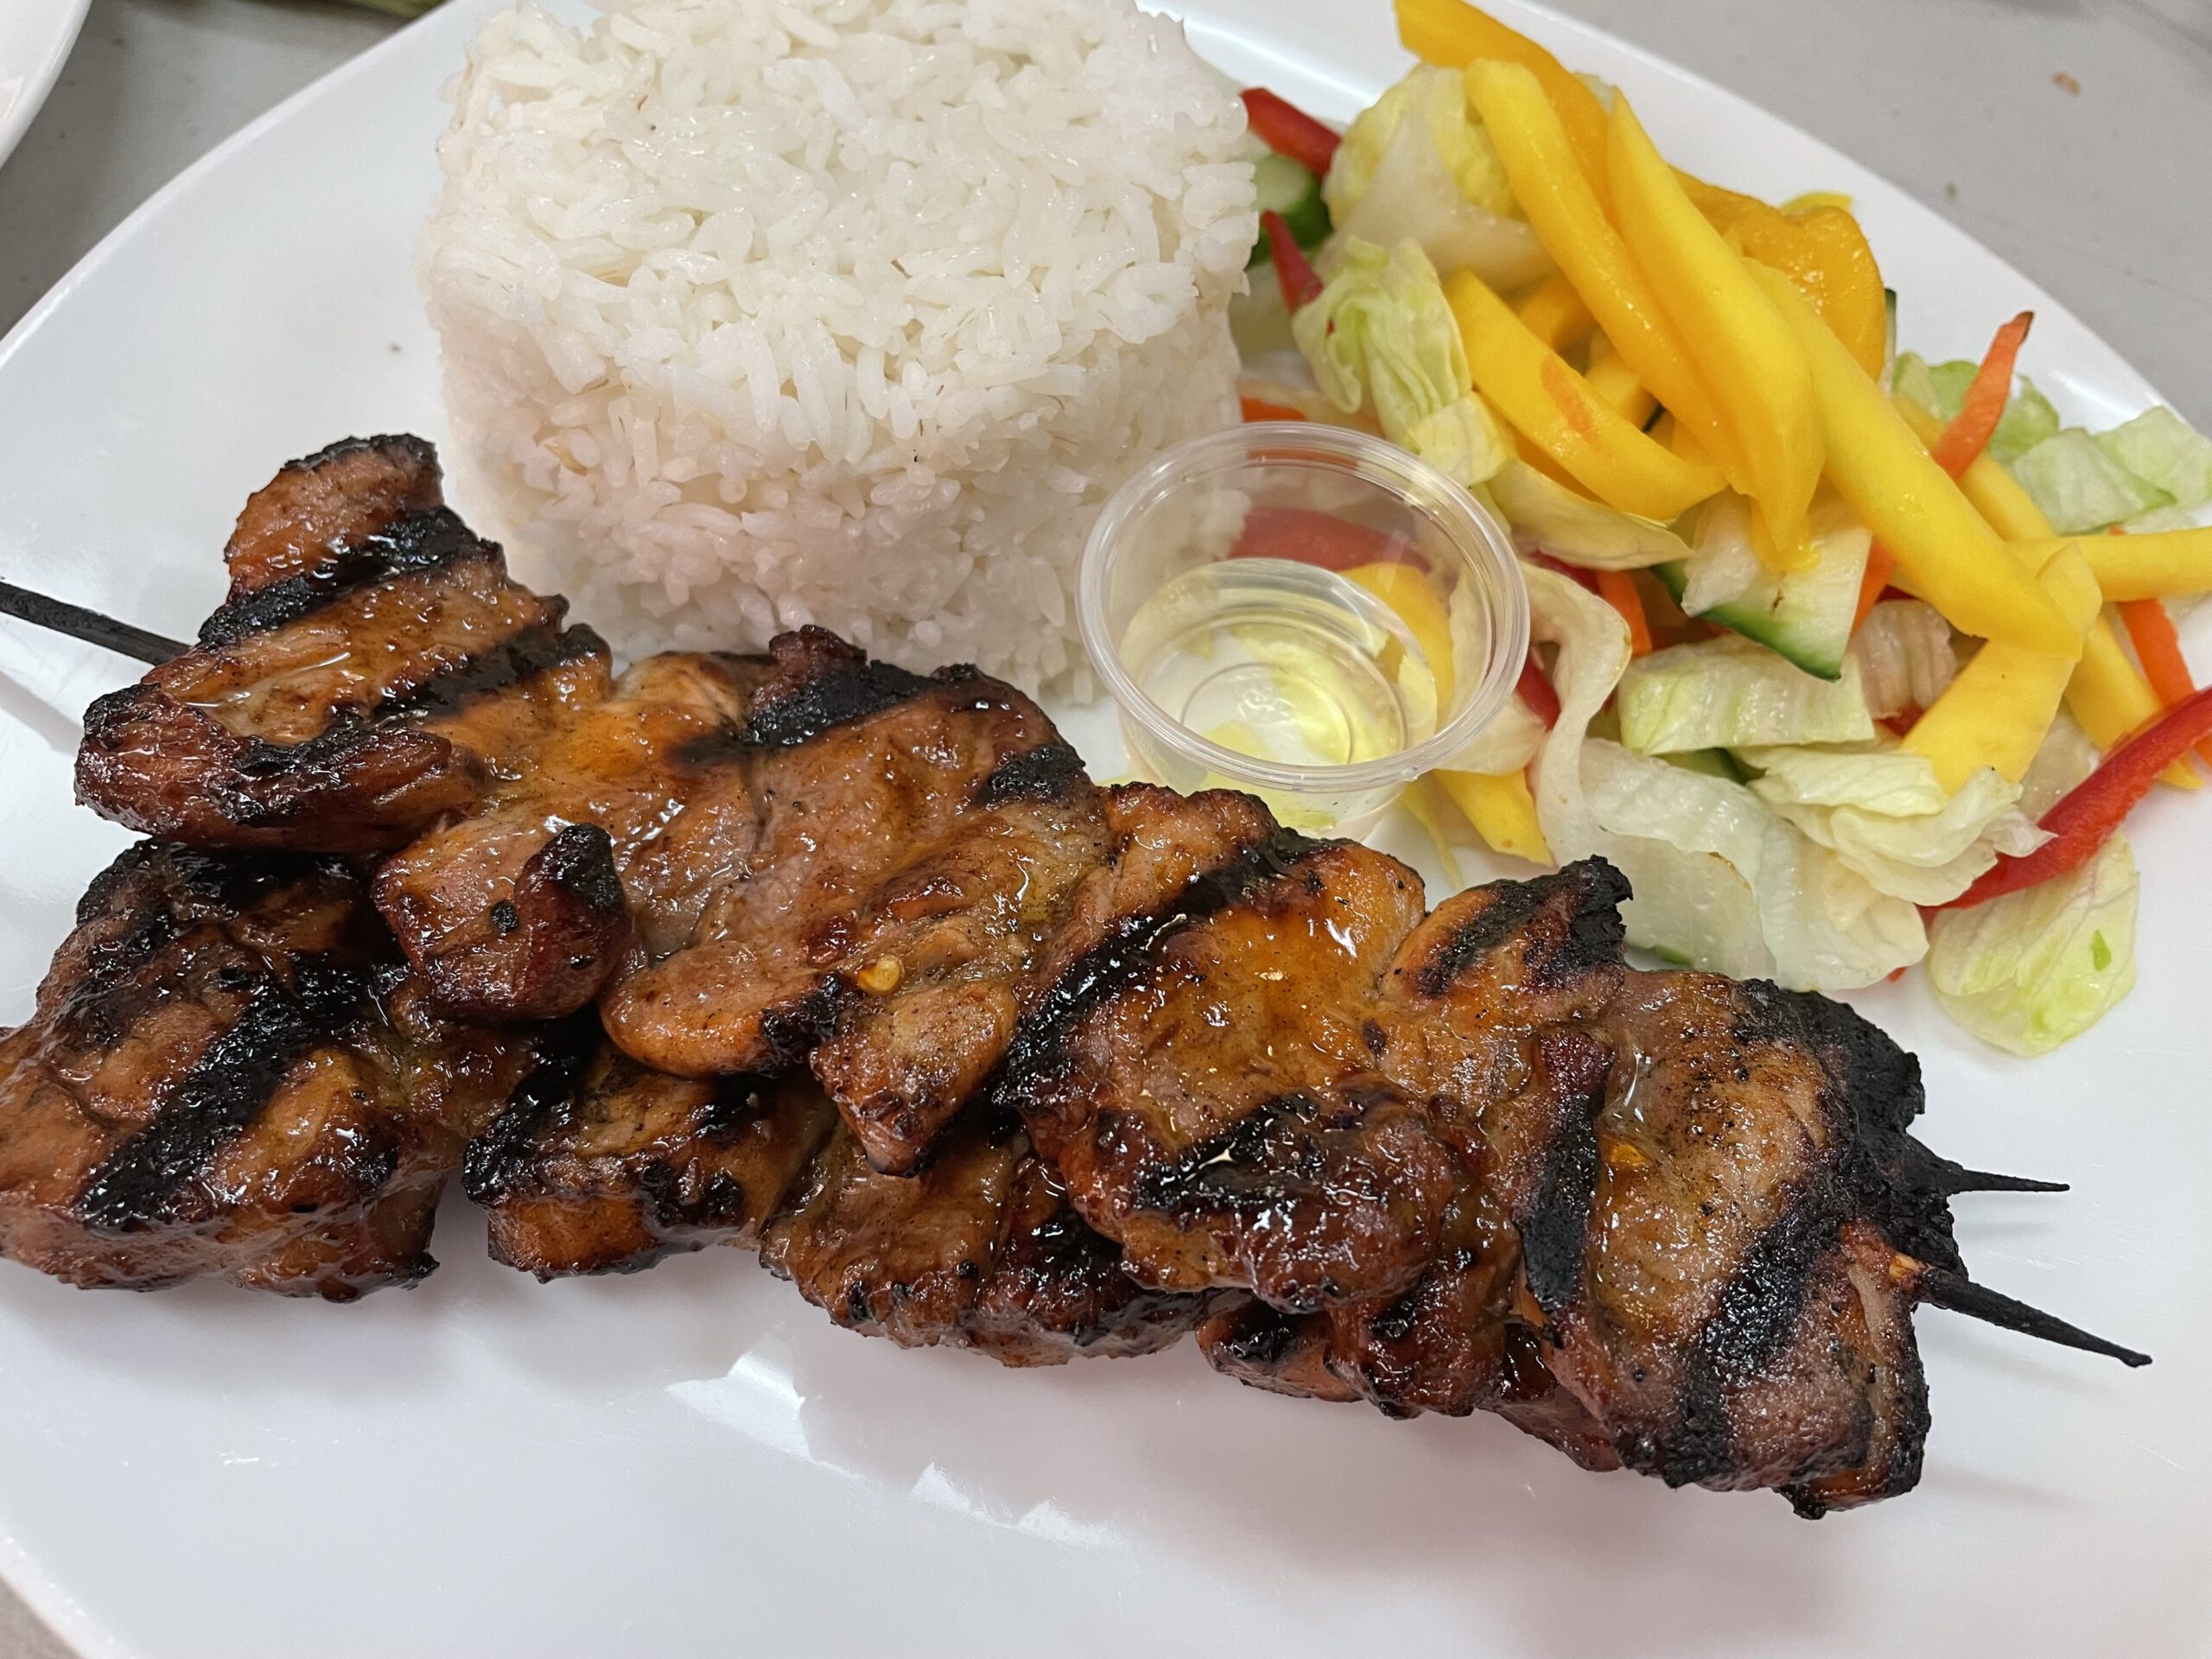 BBQ Pork Skewers from Tropical Hut Philippine Cuisine in Windsor, Ontario.